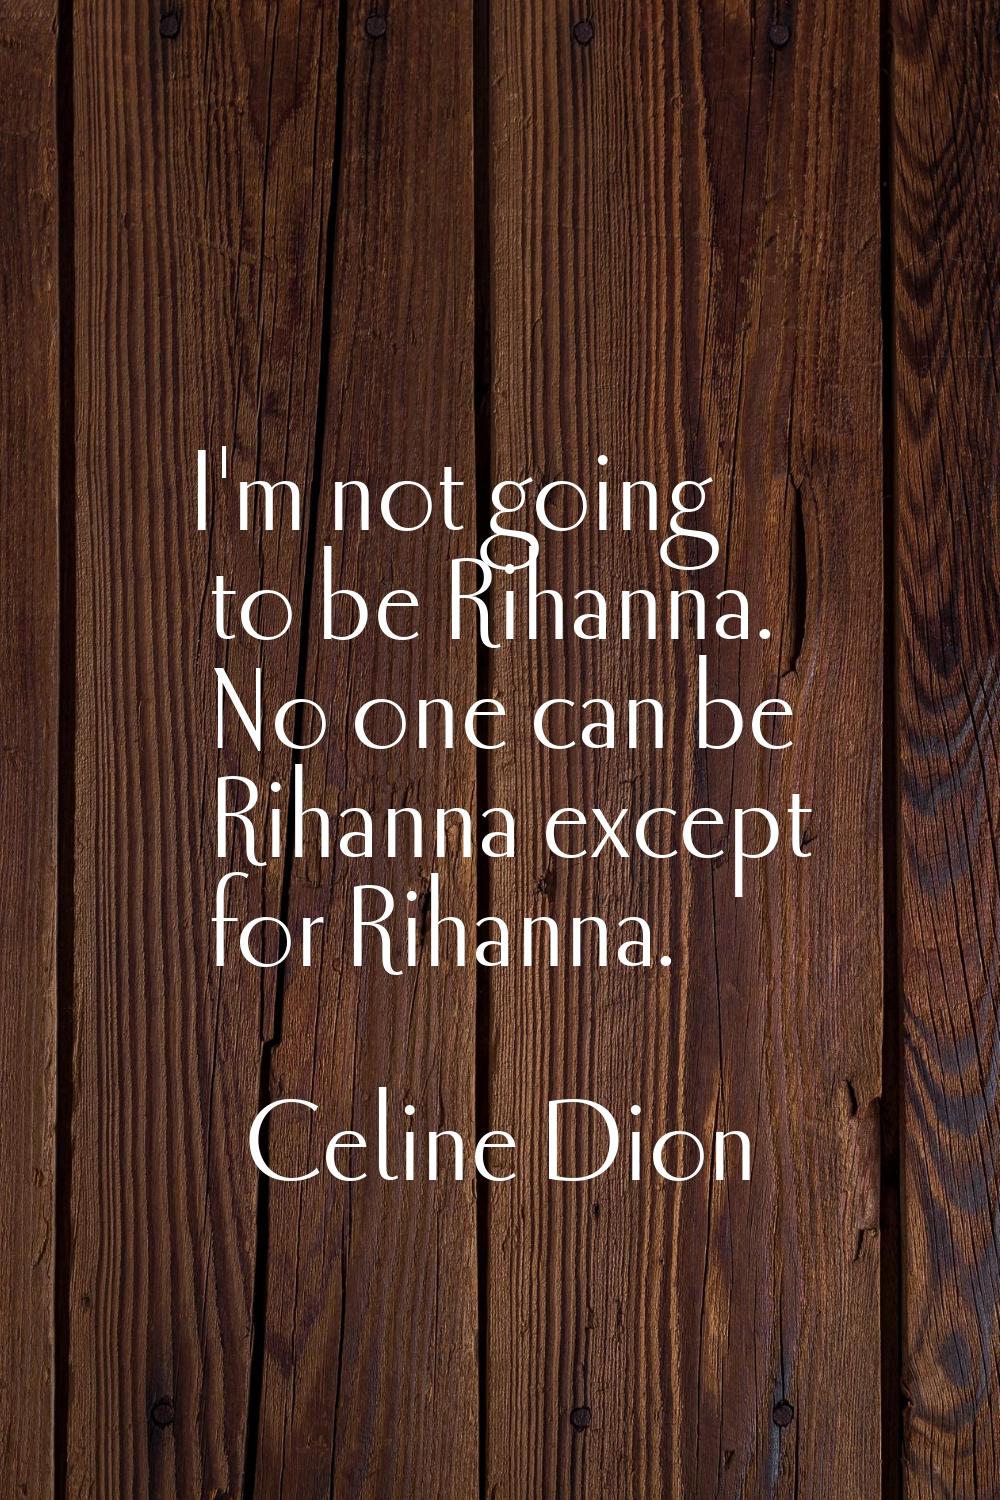 I'm not going to be Rihanna. No one can be Rihanna except for Rihanna.